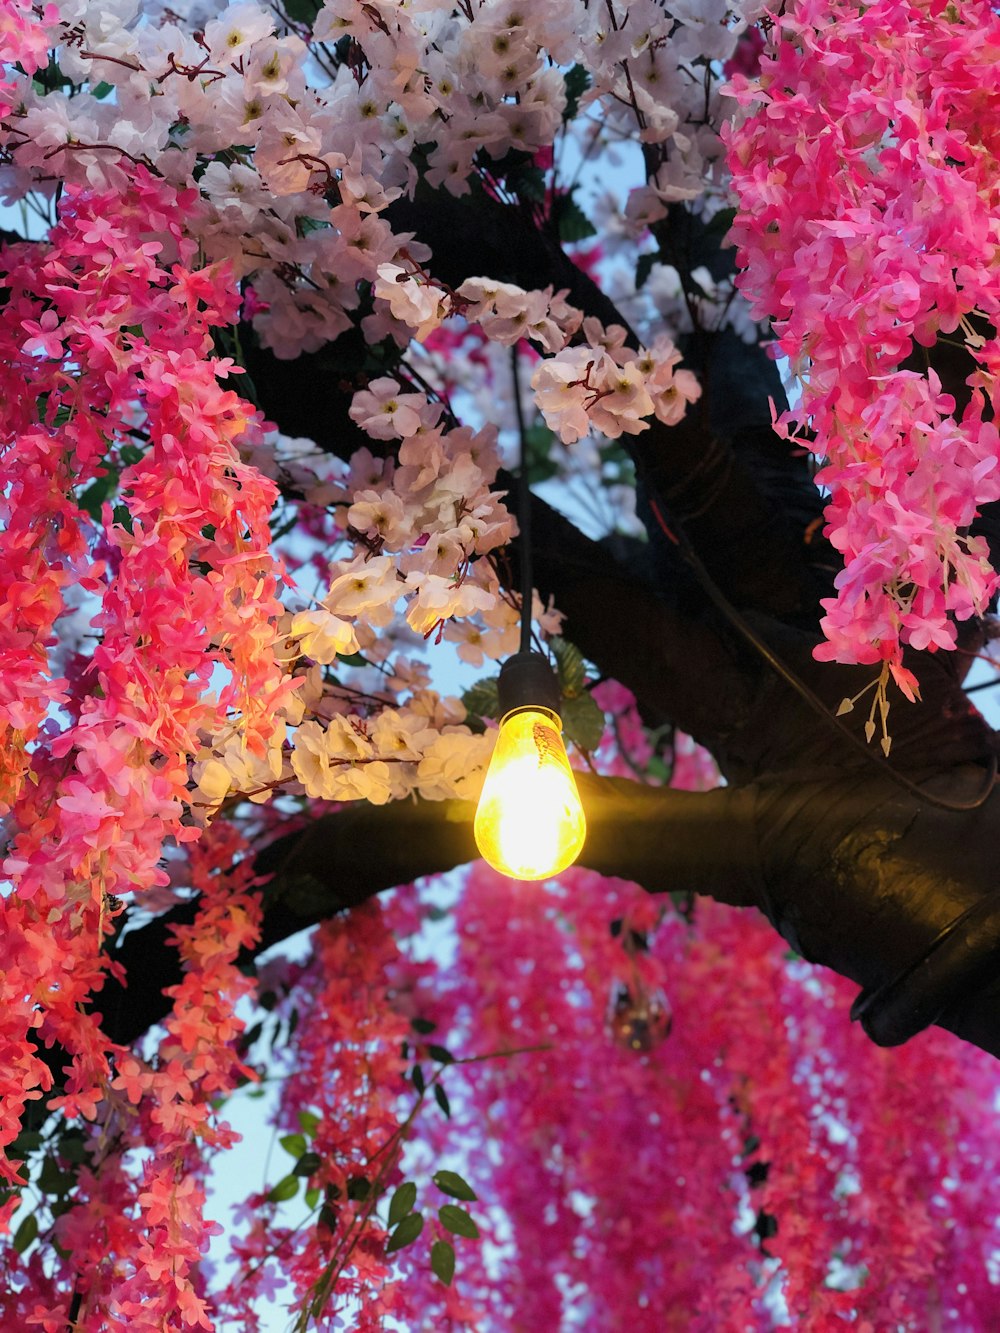 a tree with pink and white flowers and a light bulb